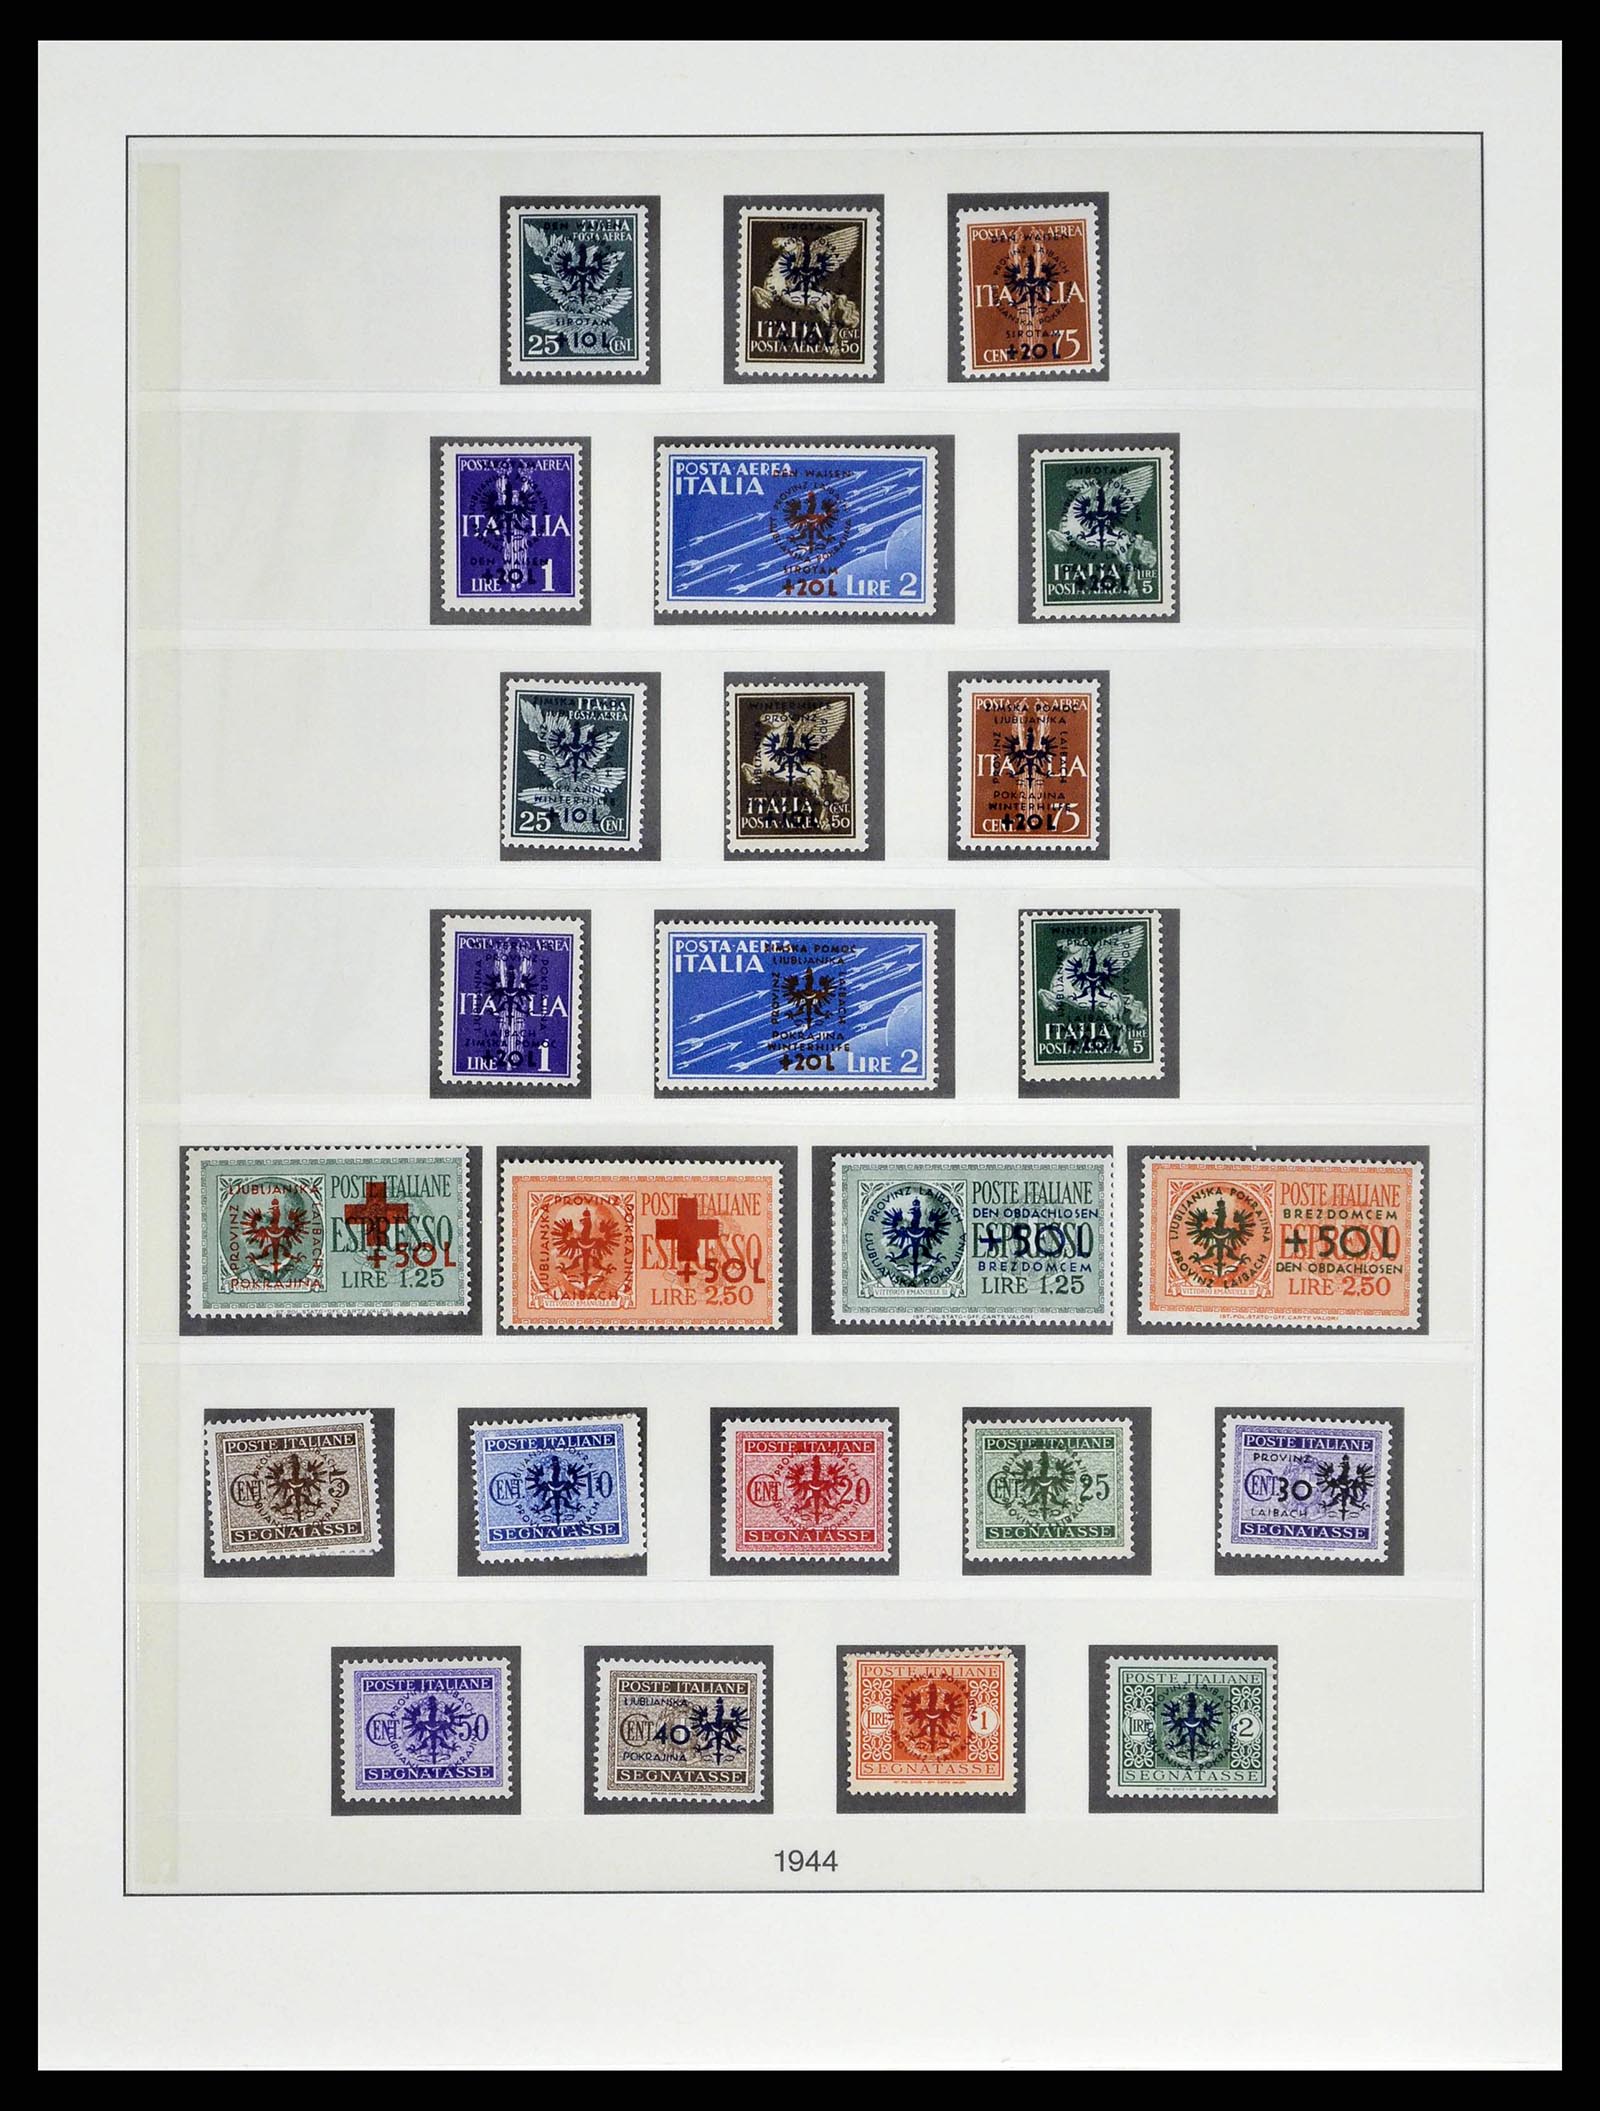 38505 0052 - Stamp collection 38505 German occupations 2nd world war 1939-1945.